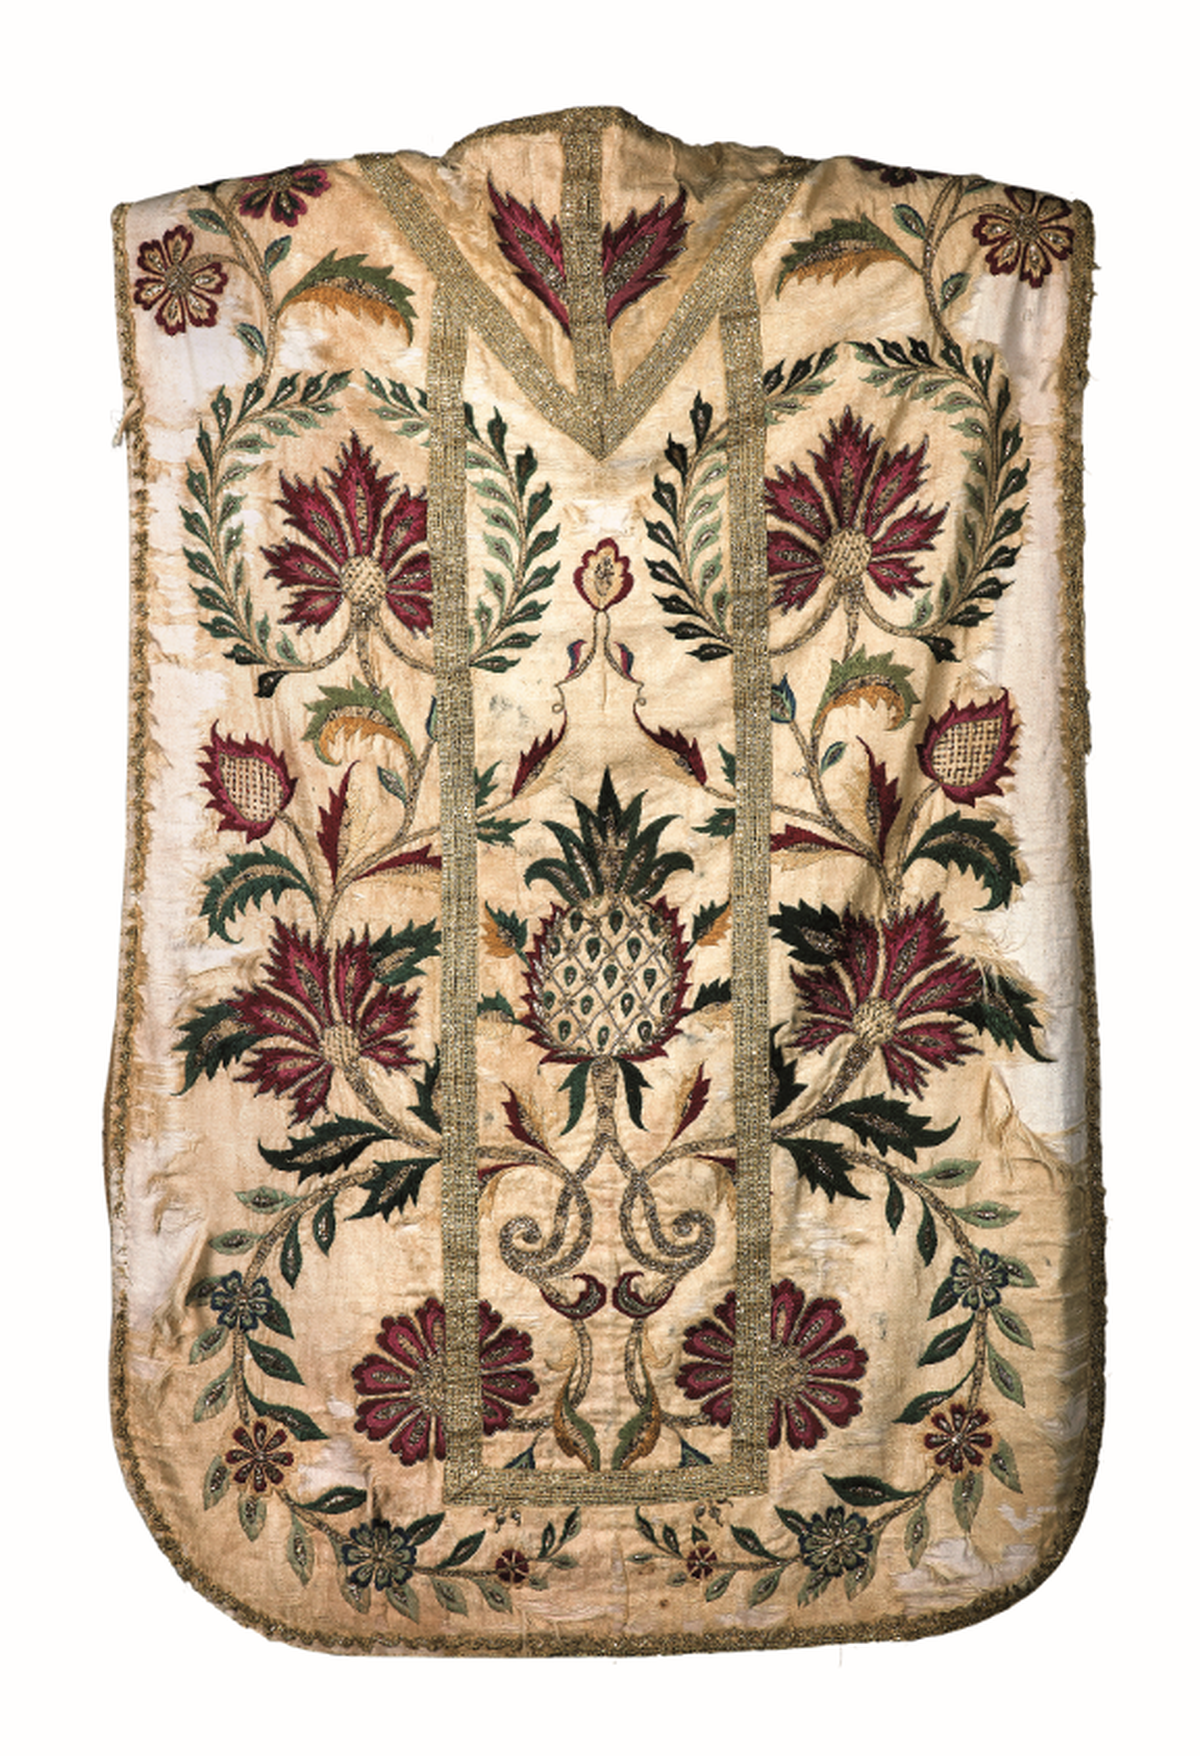 The 18th century chasuble from St Michael’s church at Orlim